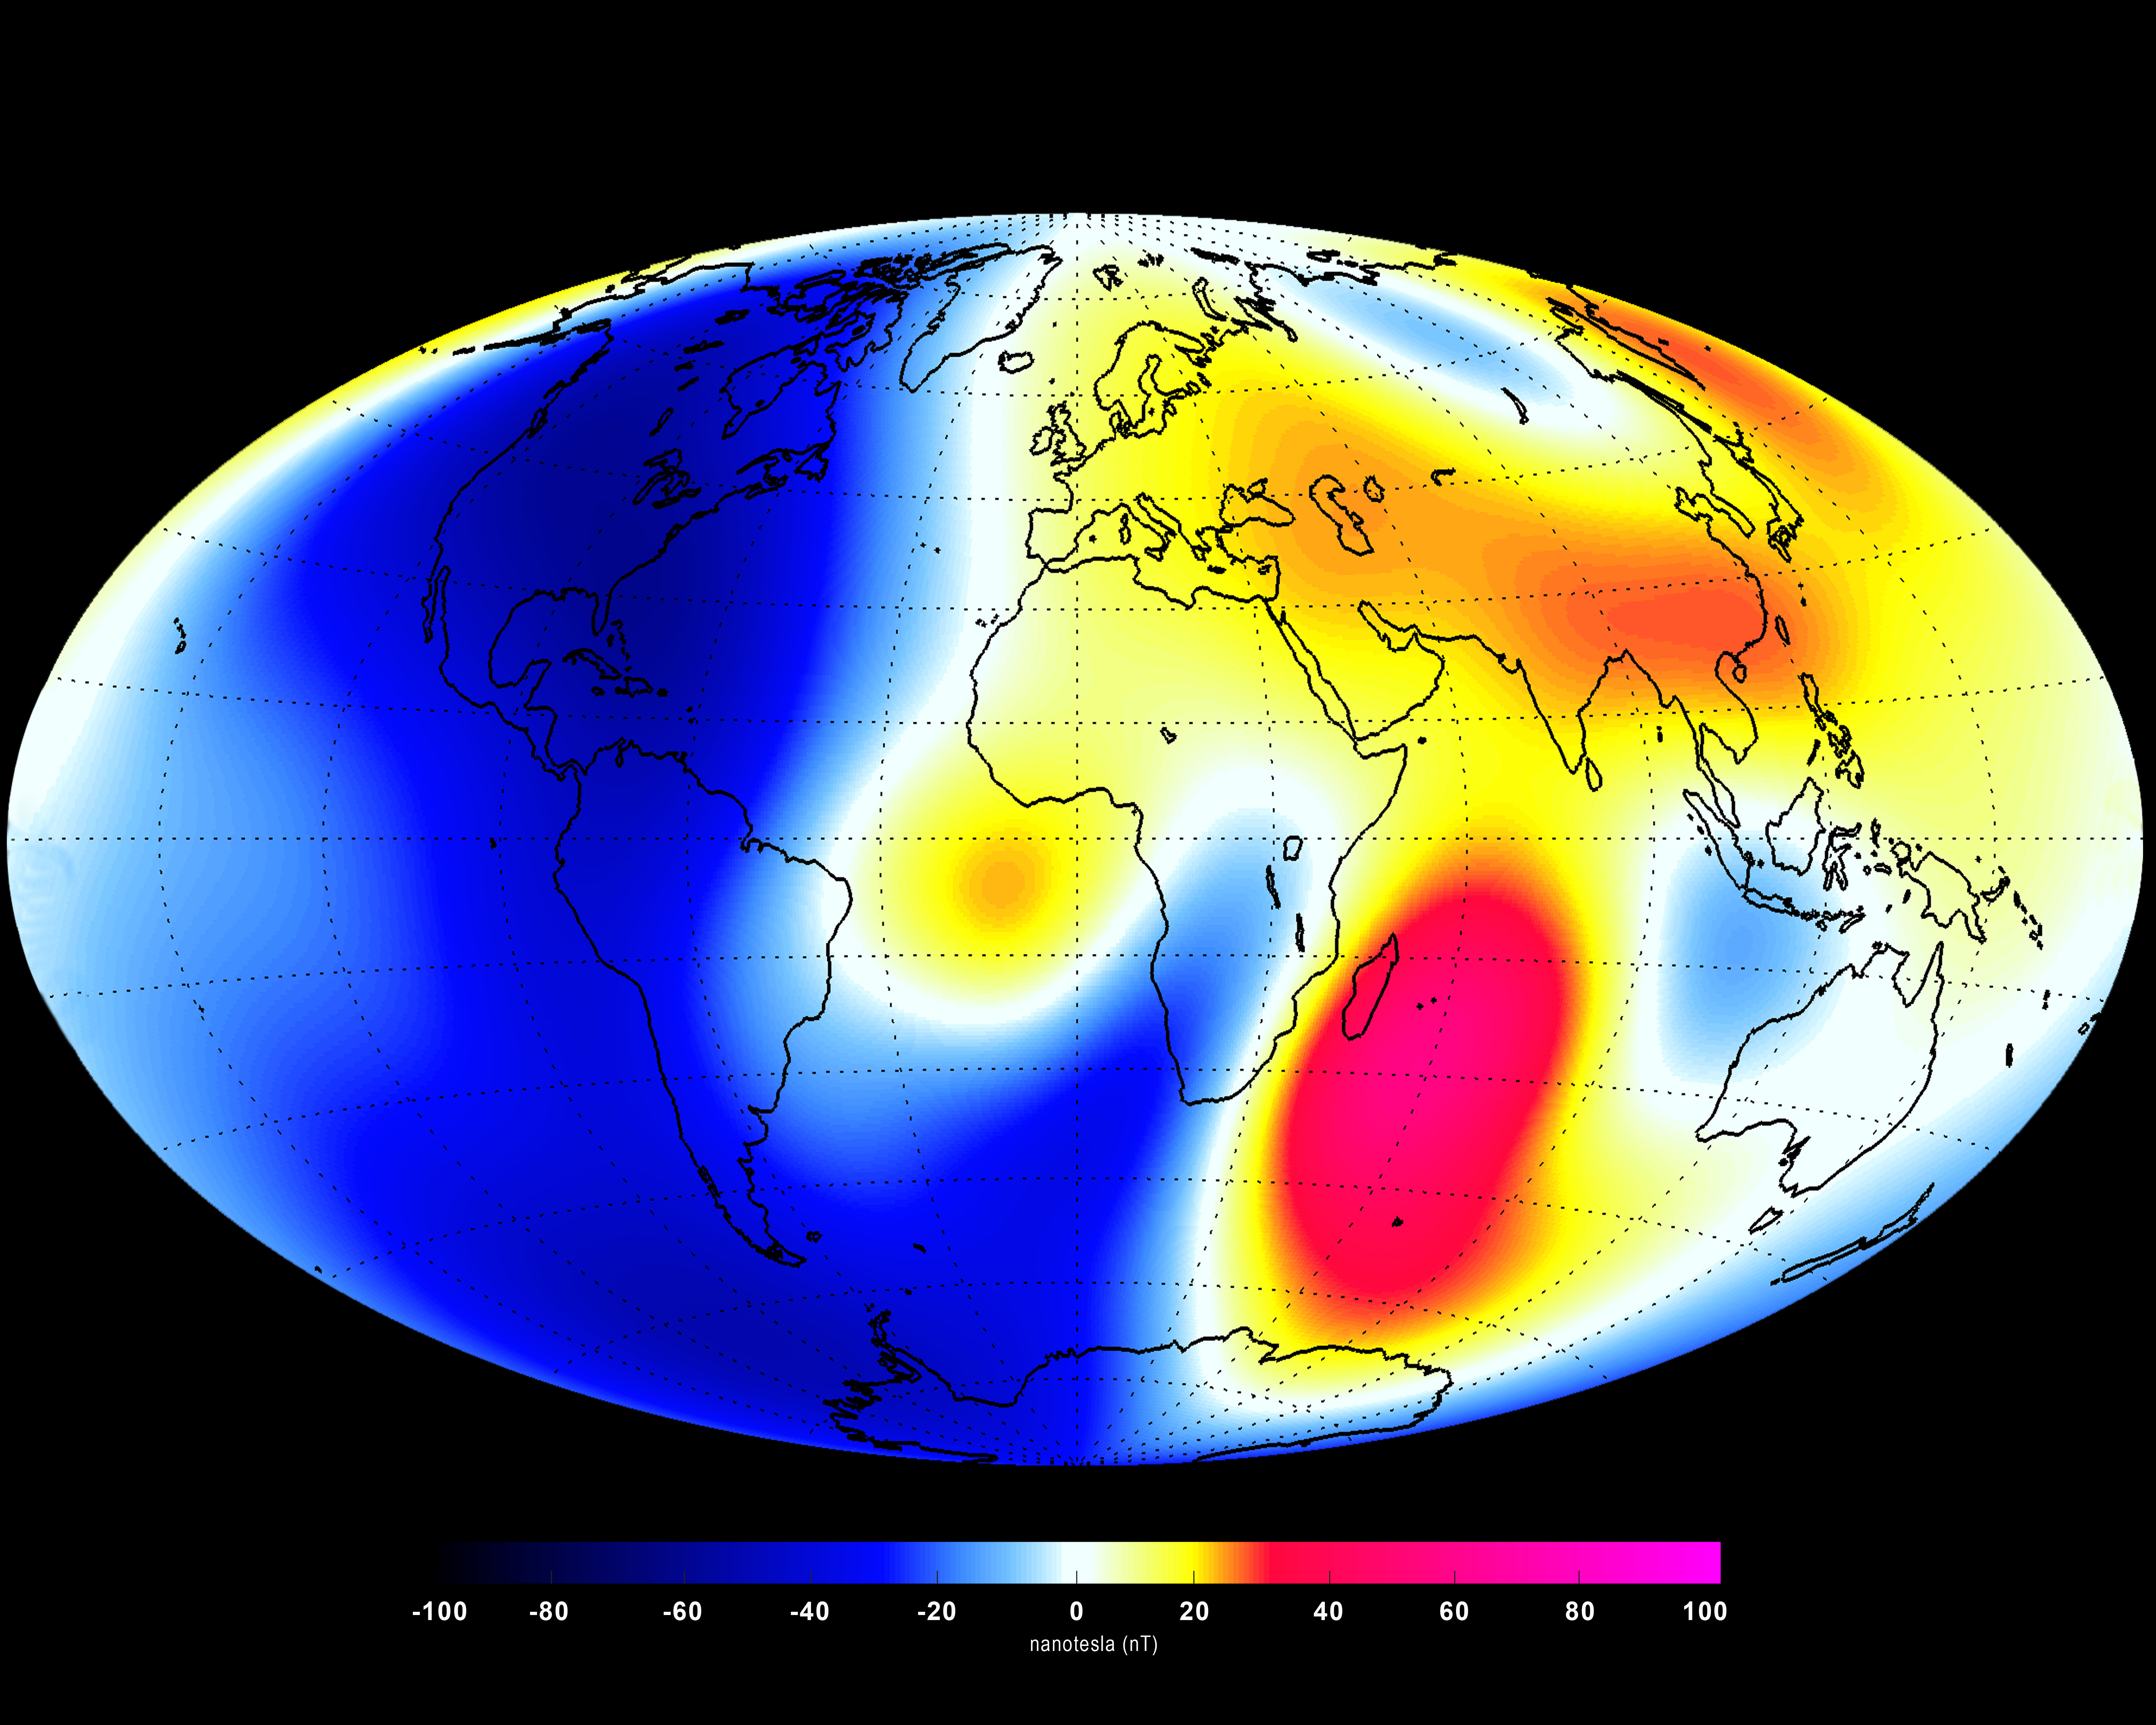 Image of the changes in Earth's magnetic field between January 1 and June 30, 2014